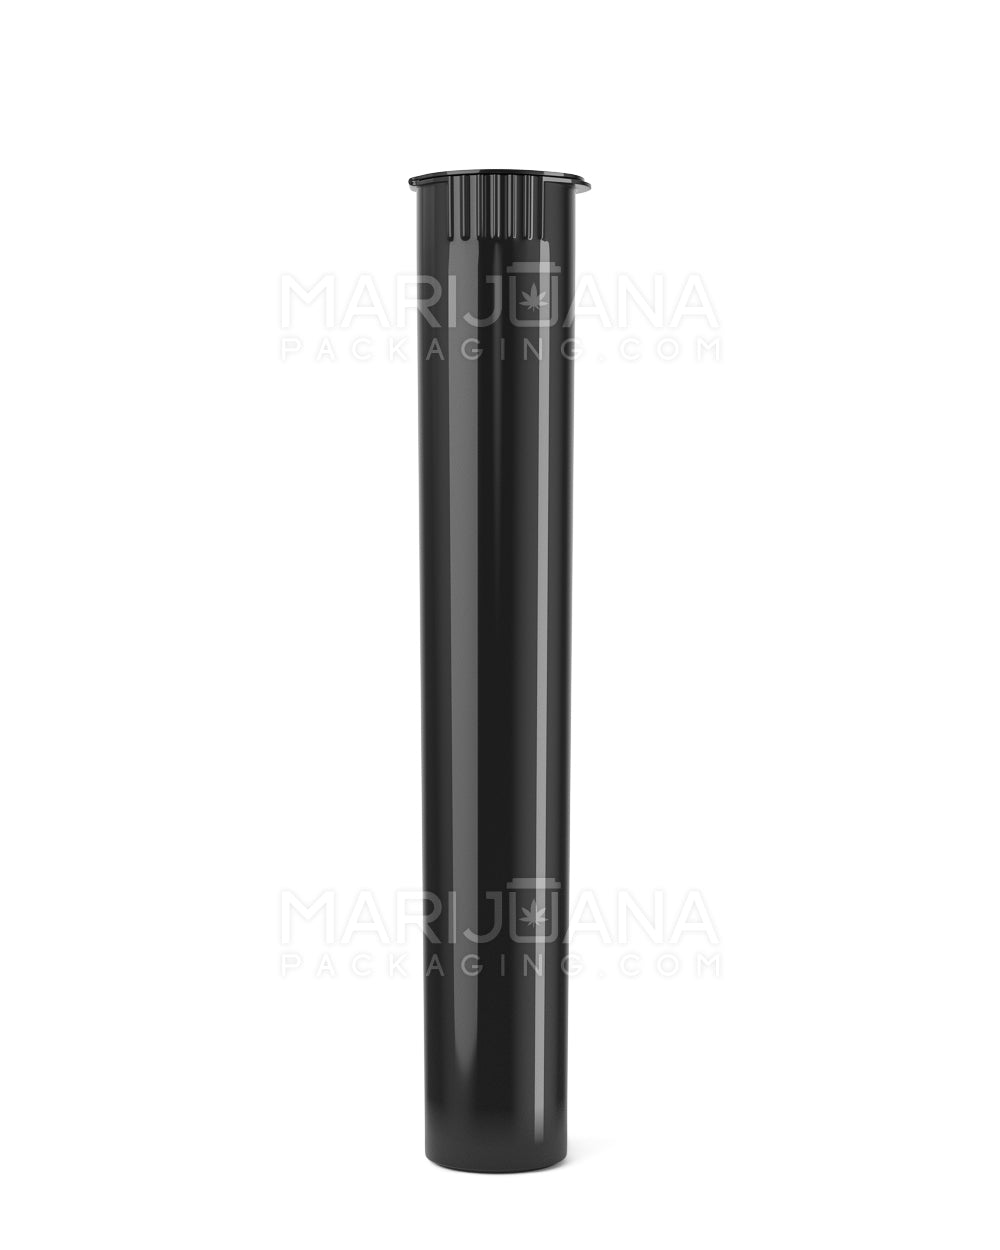 Child Resistant | King Size Pop Top Opaque Plastic Pre-Roll Tubes | 116mm - Black - 1000 Count - 2